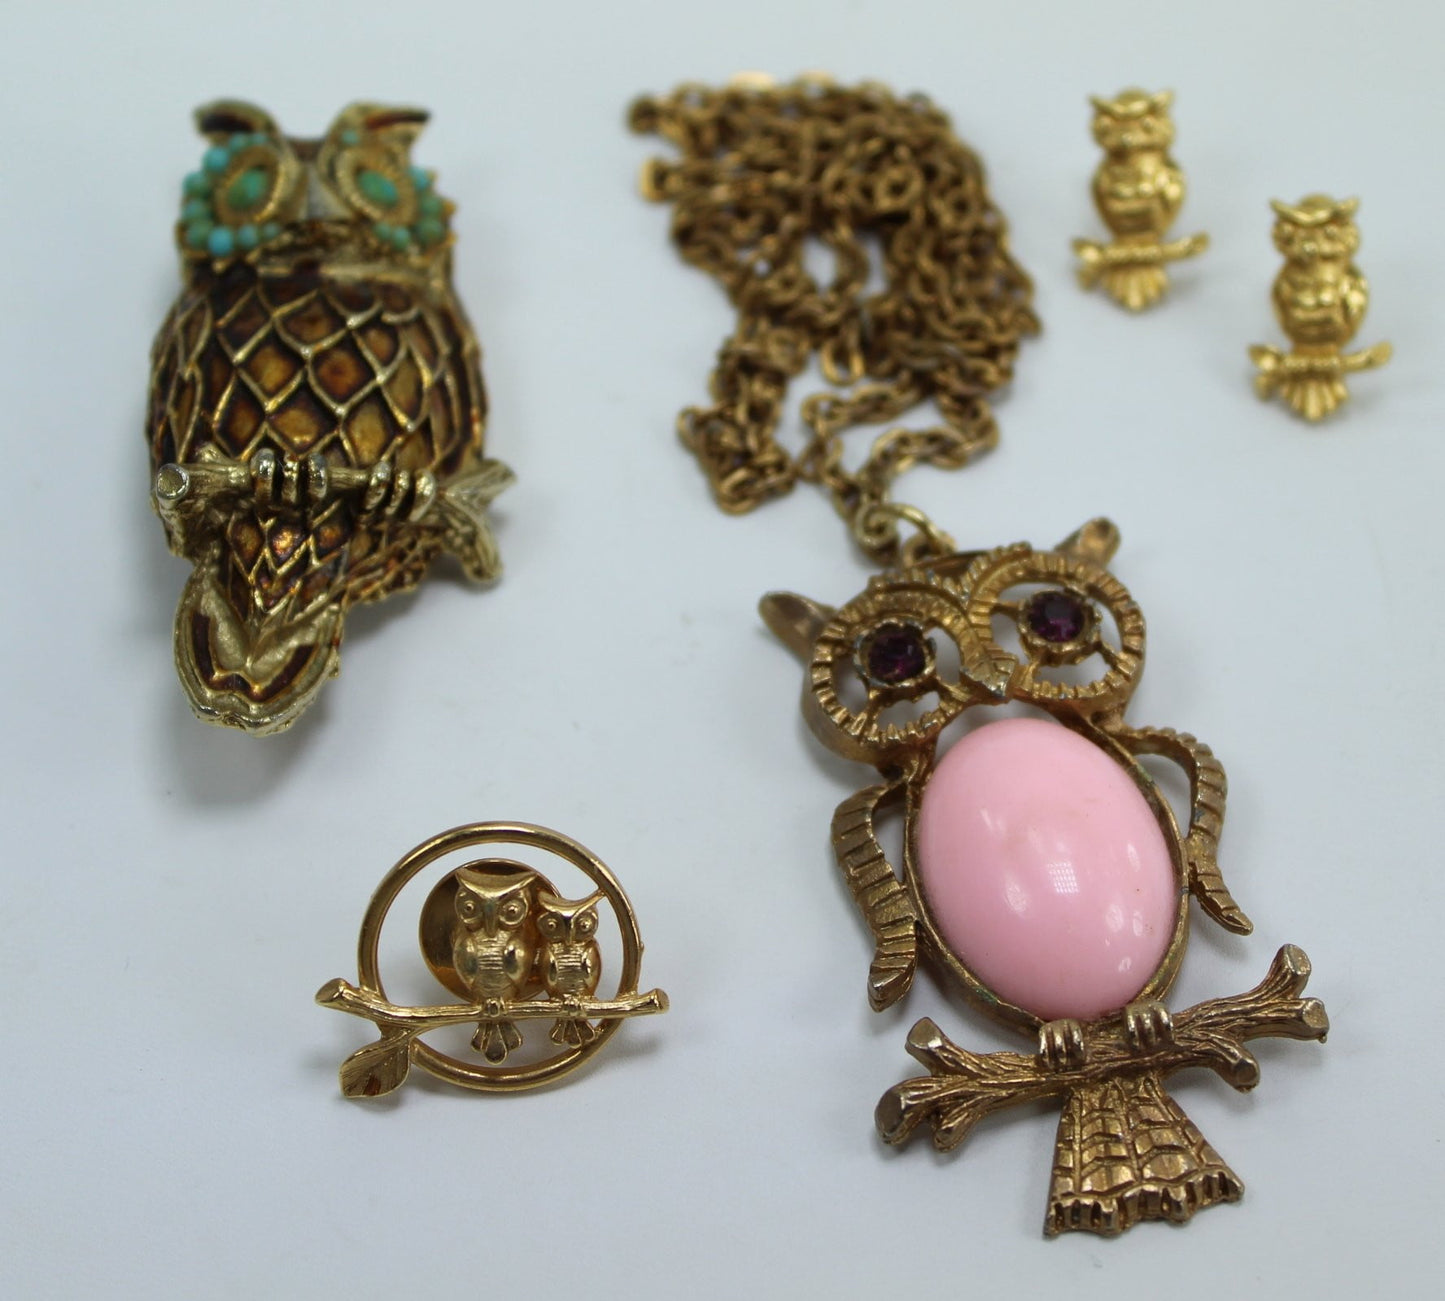 OWLS Jewelry Lot 8 Pieces Necklace Pins Earrings Vintage Crystals Pink Jelly B MOP Wearables collectibles